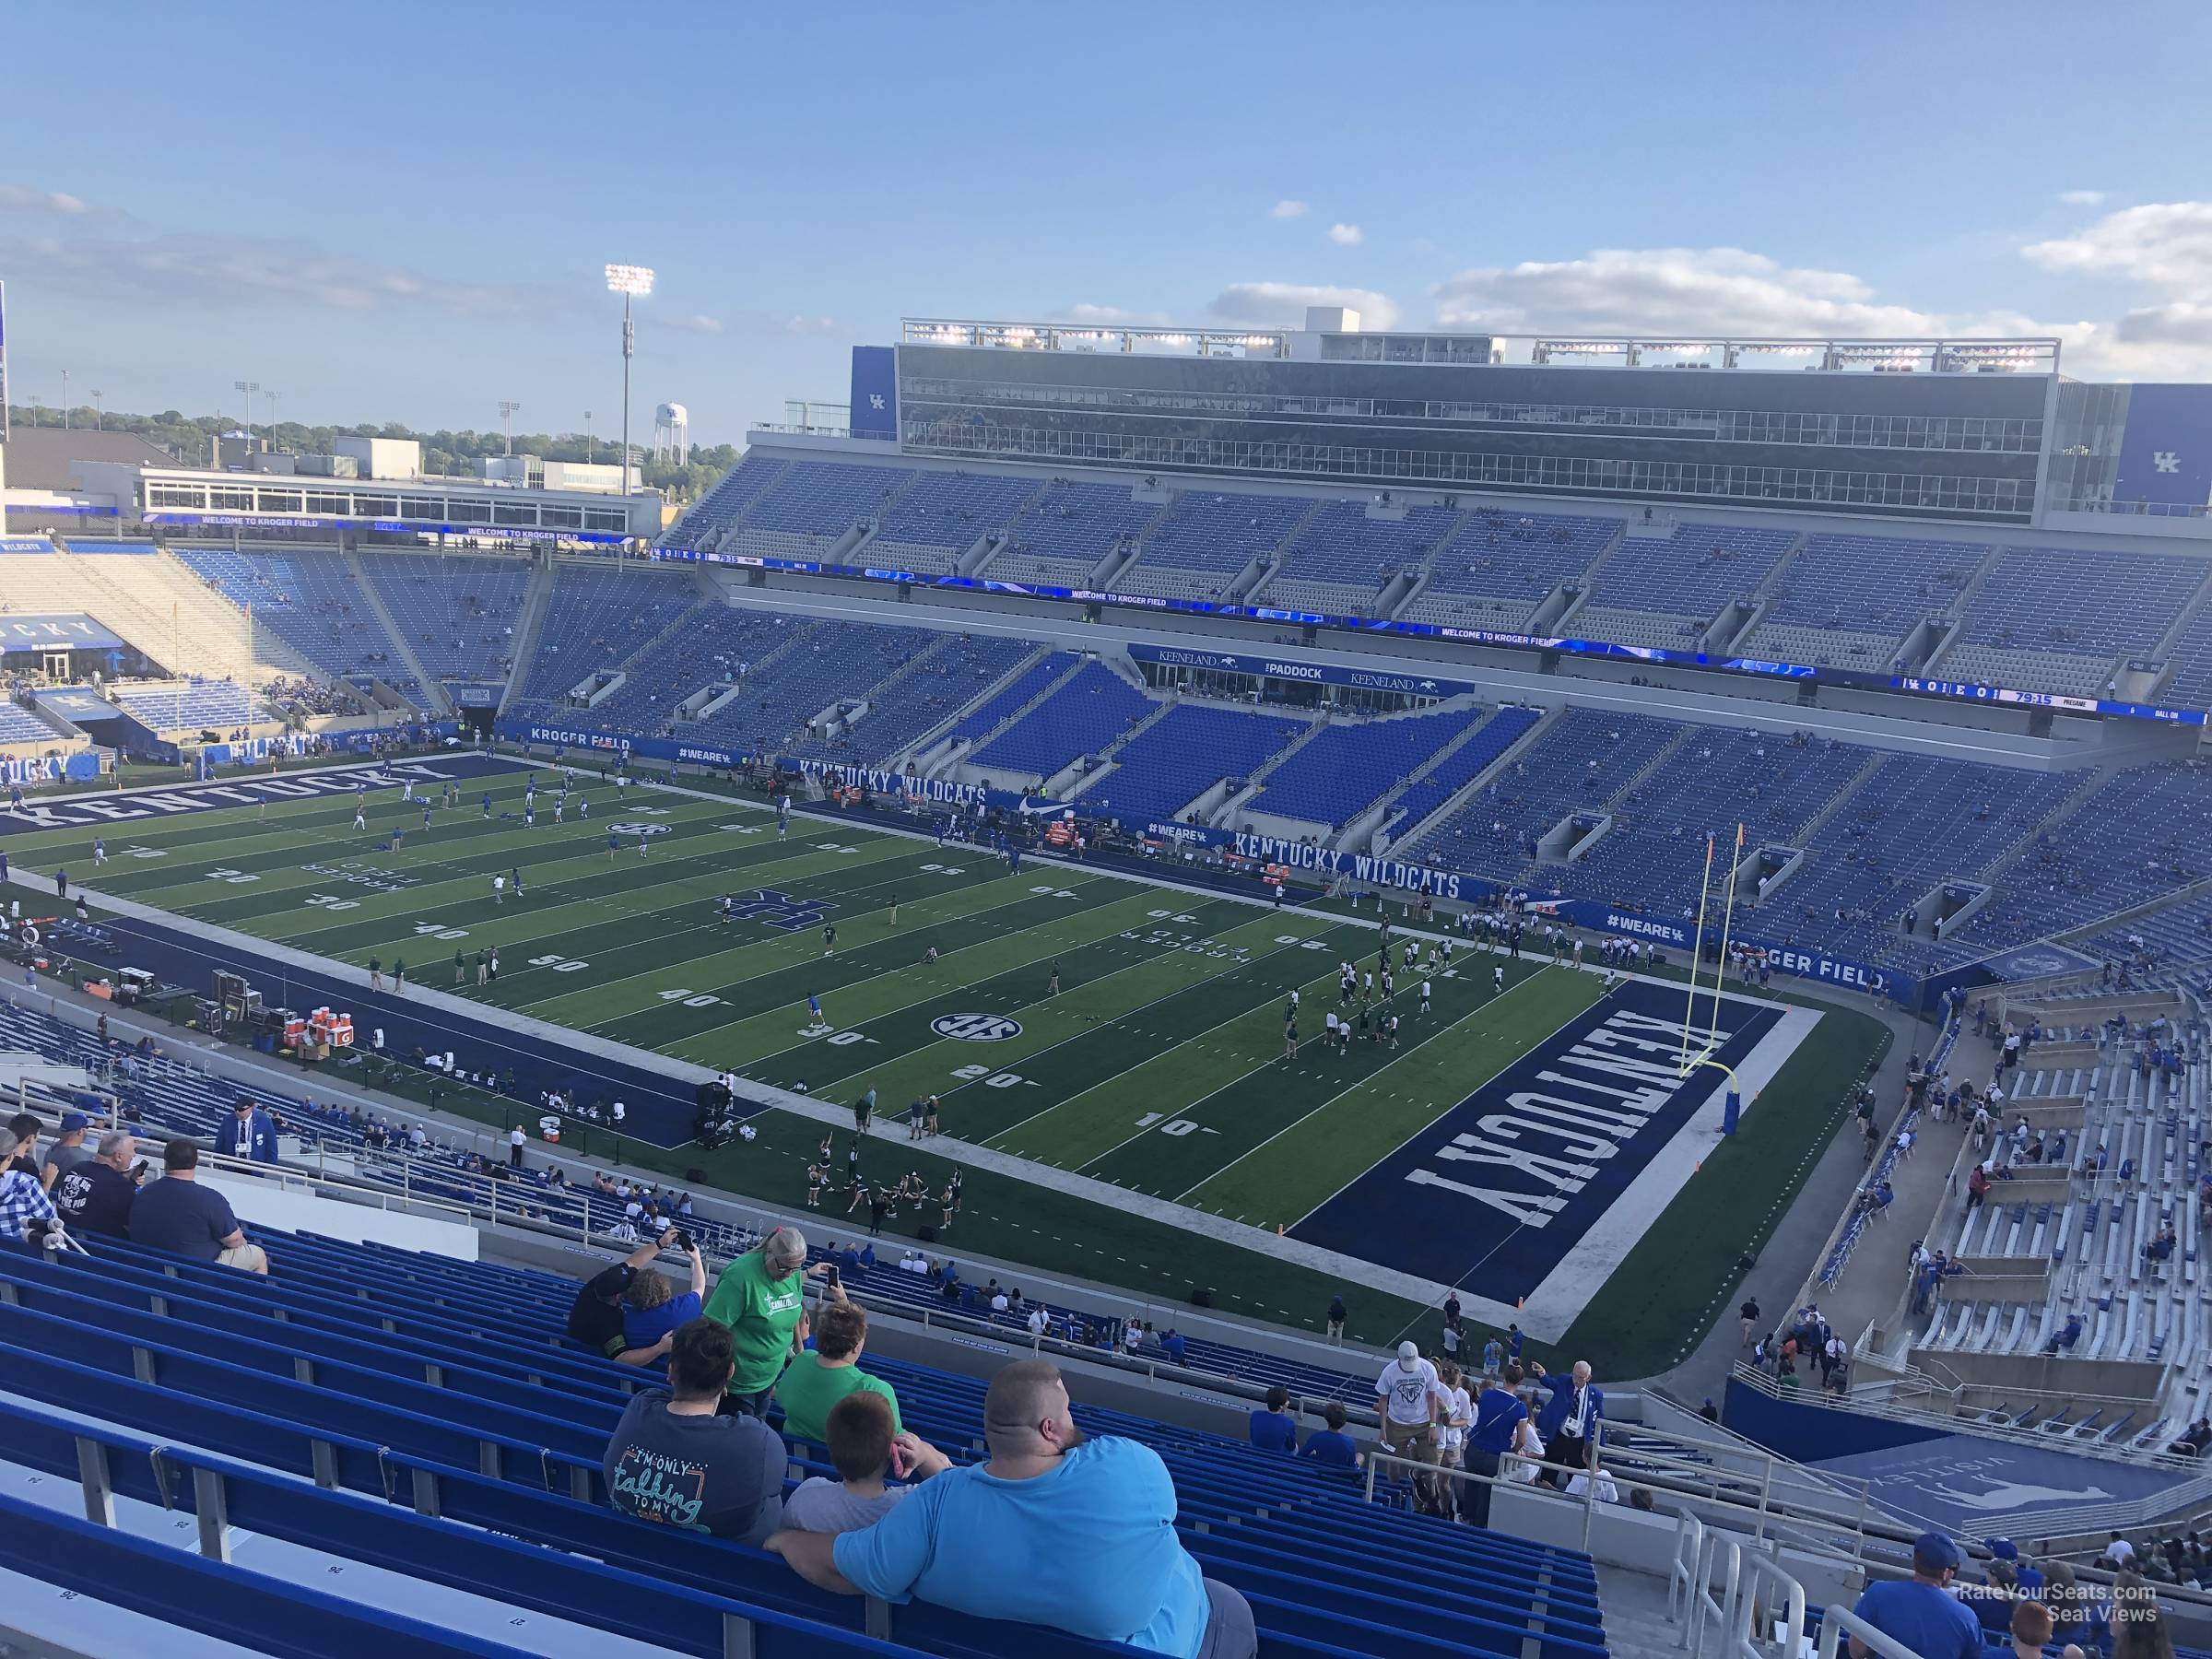 section 211, row 25 seat view  - kroger field